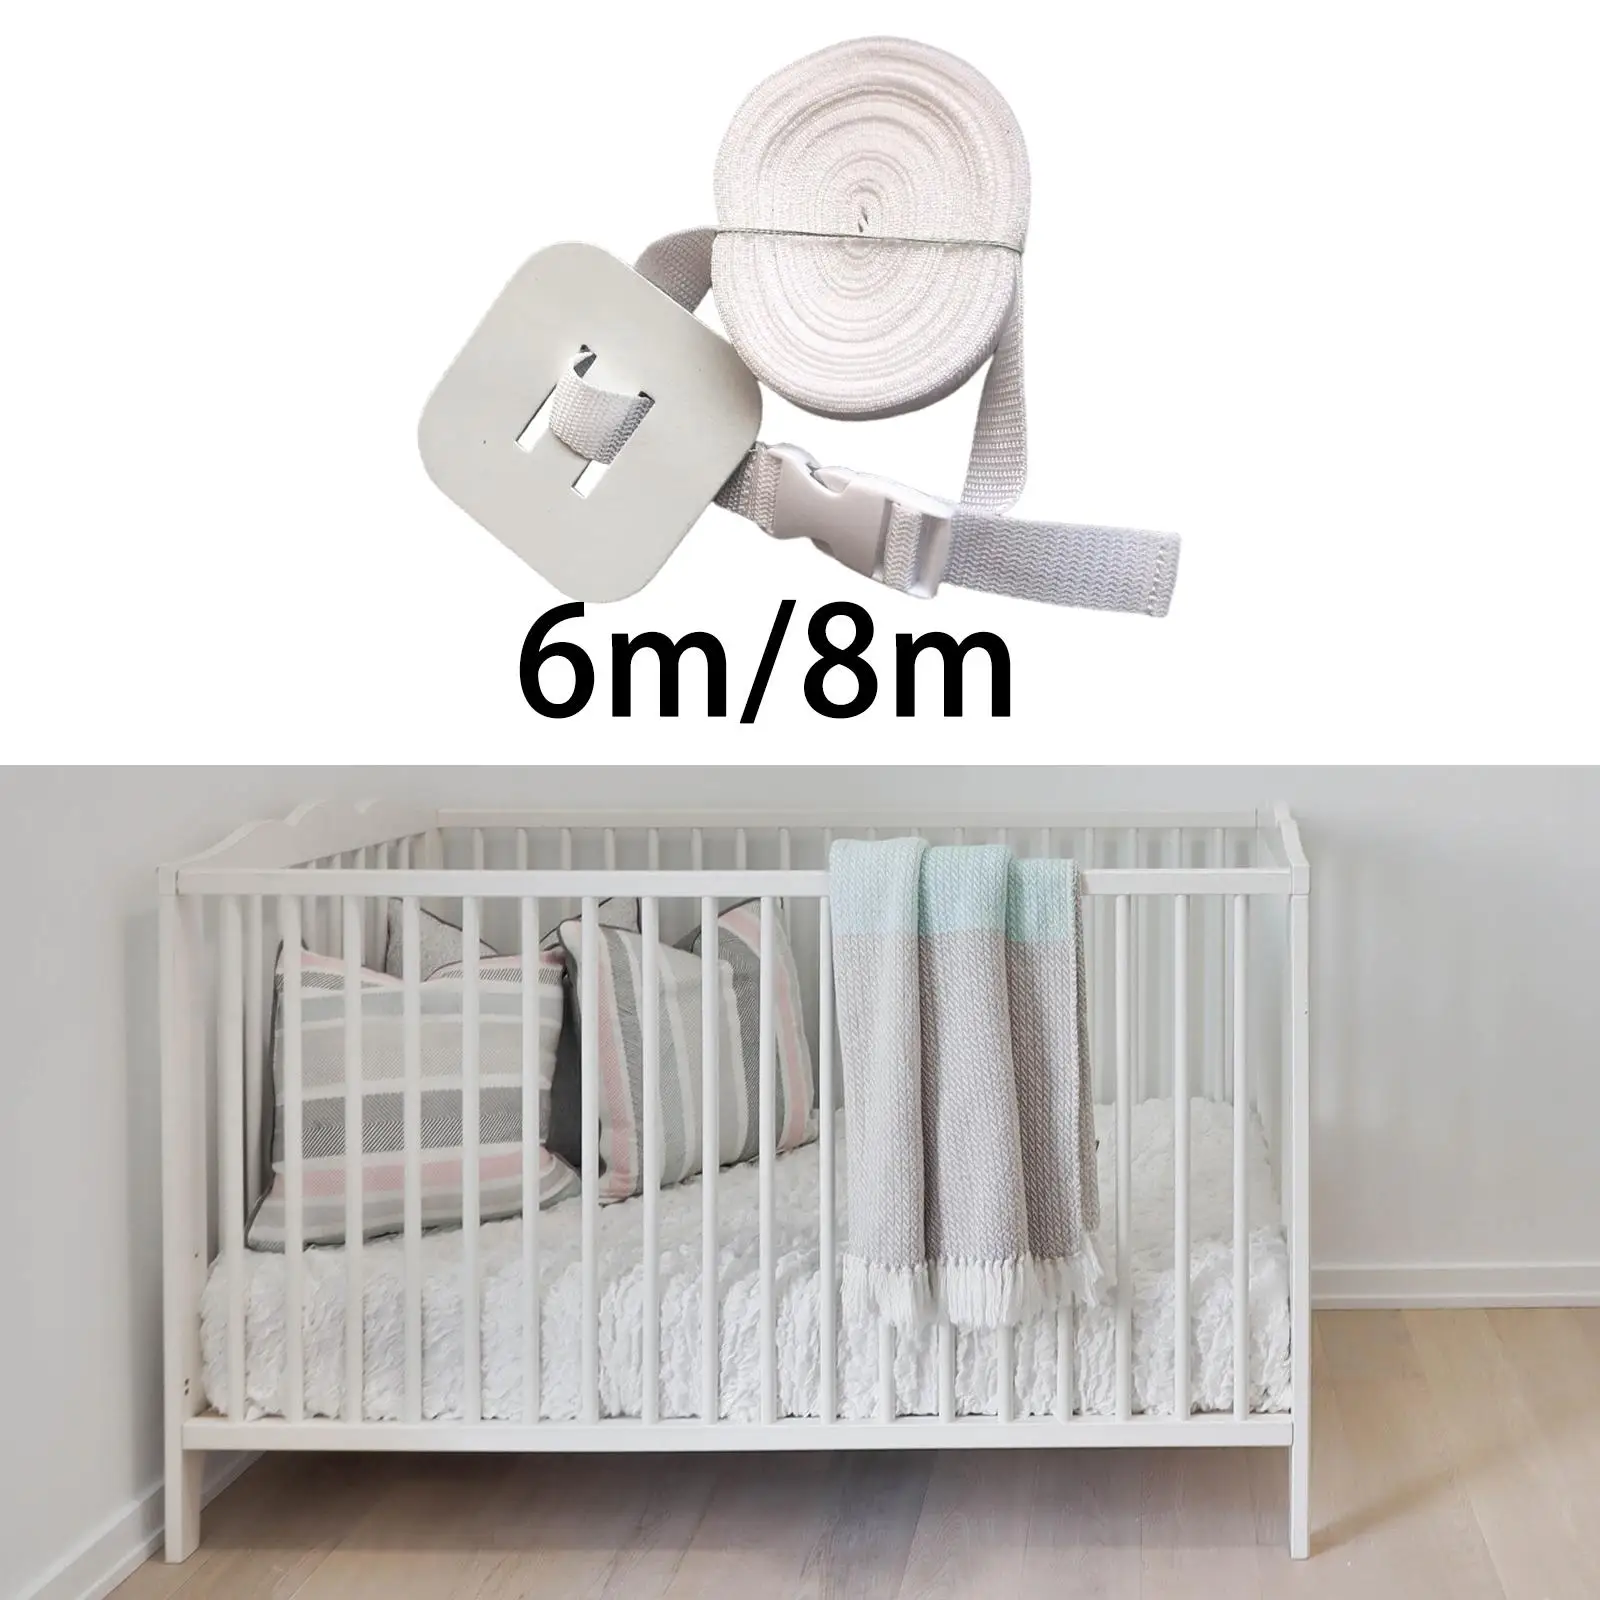 Long Bed Connector Strap Home Textiles Accessories for Sheet Bed Mattress